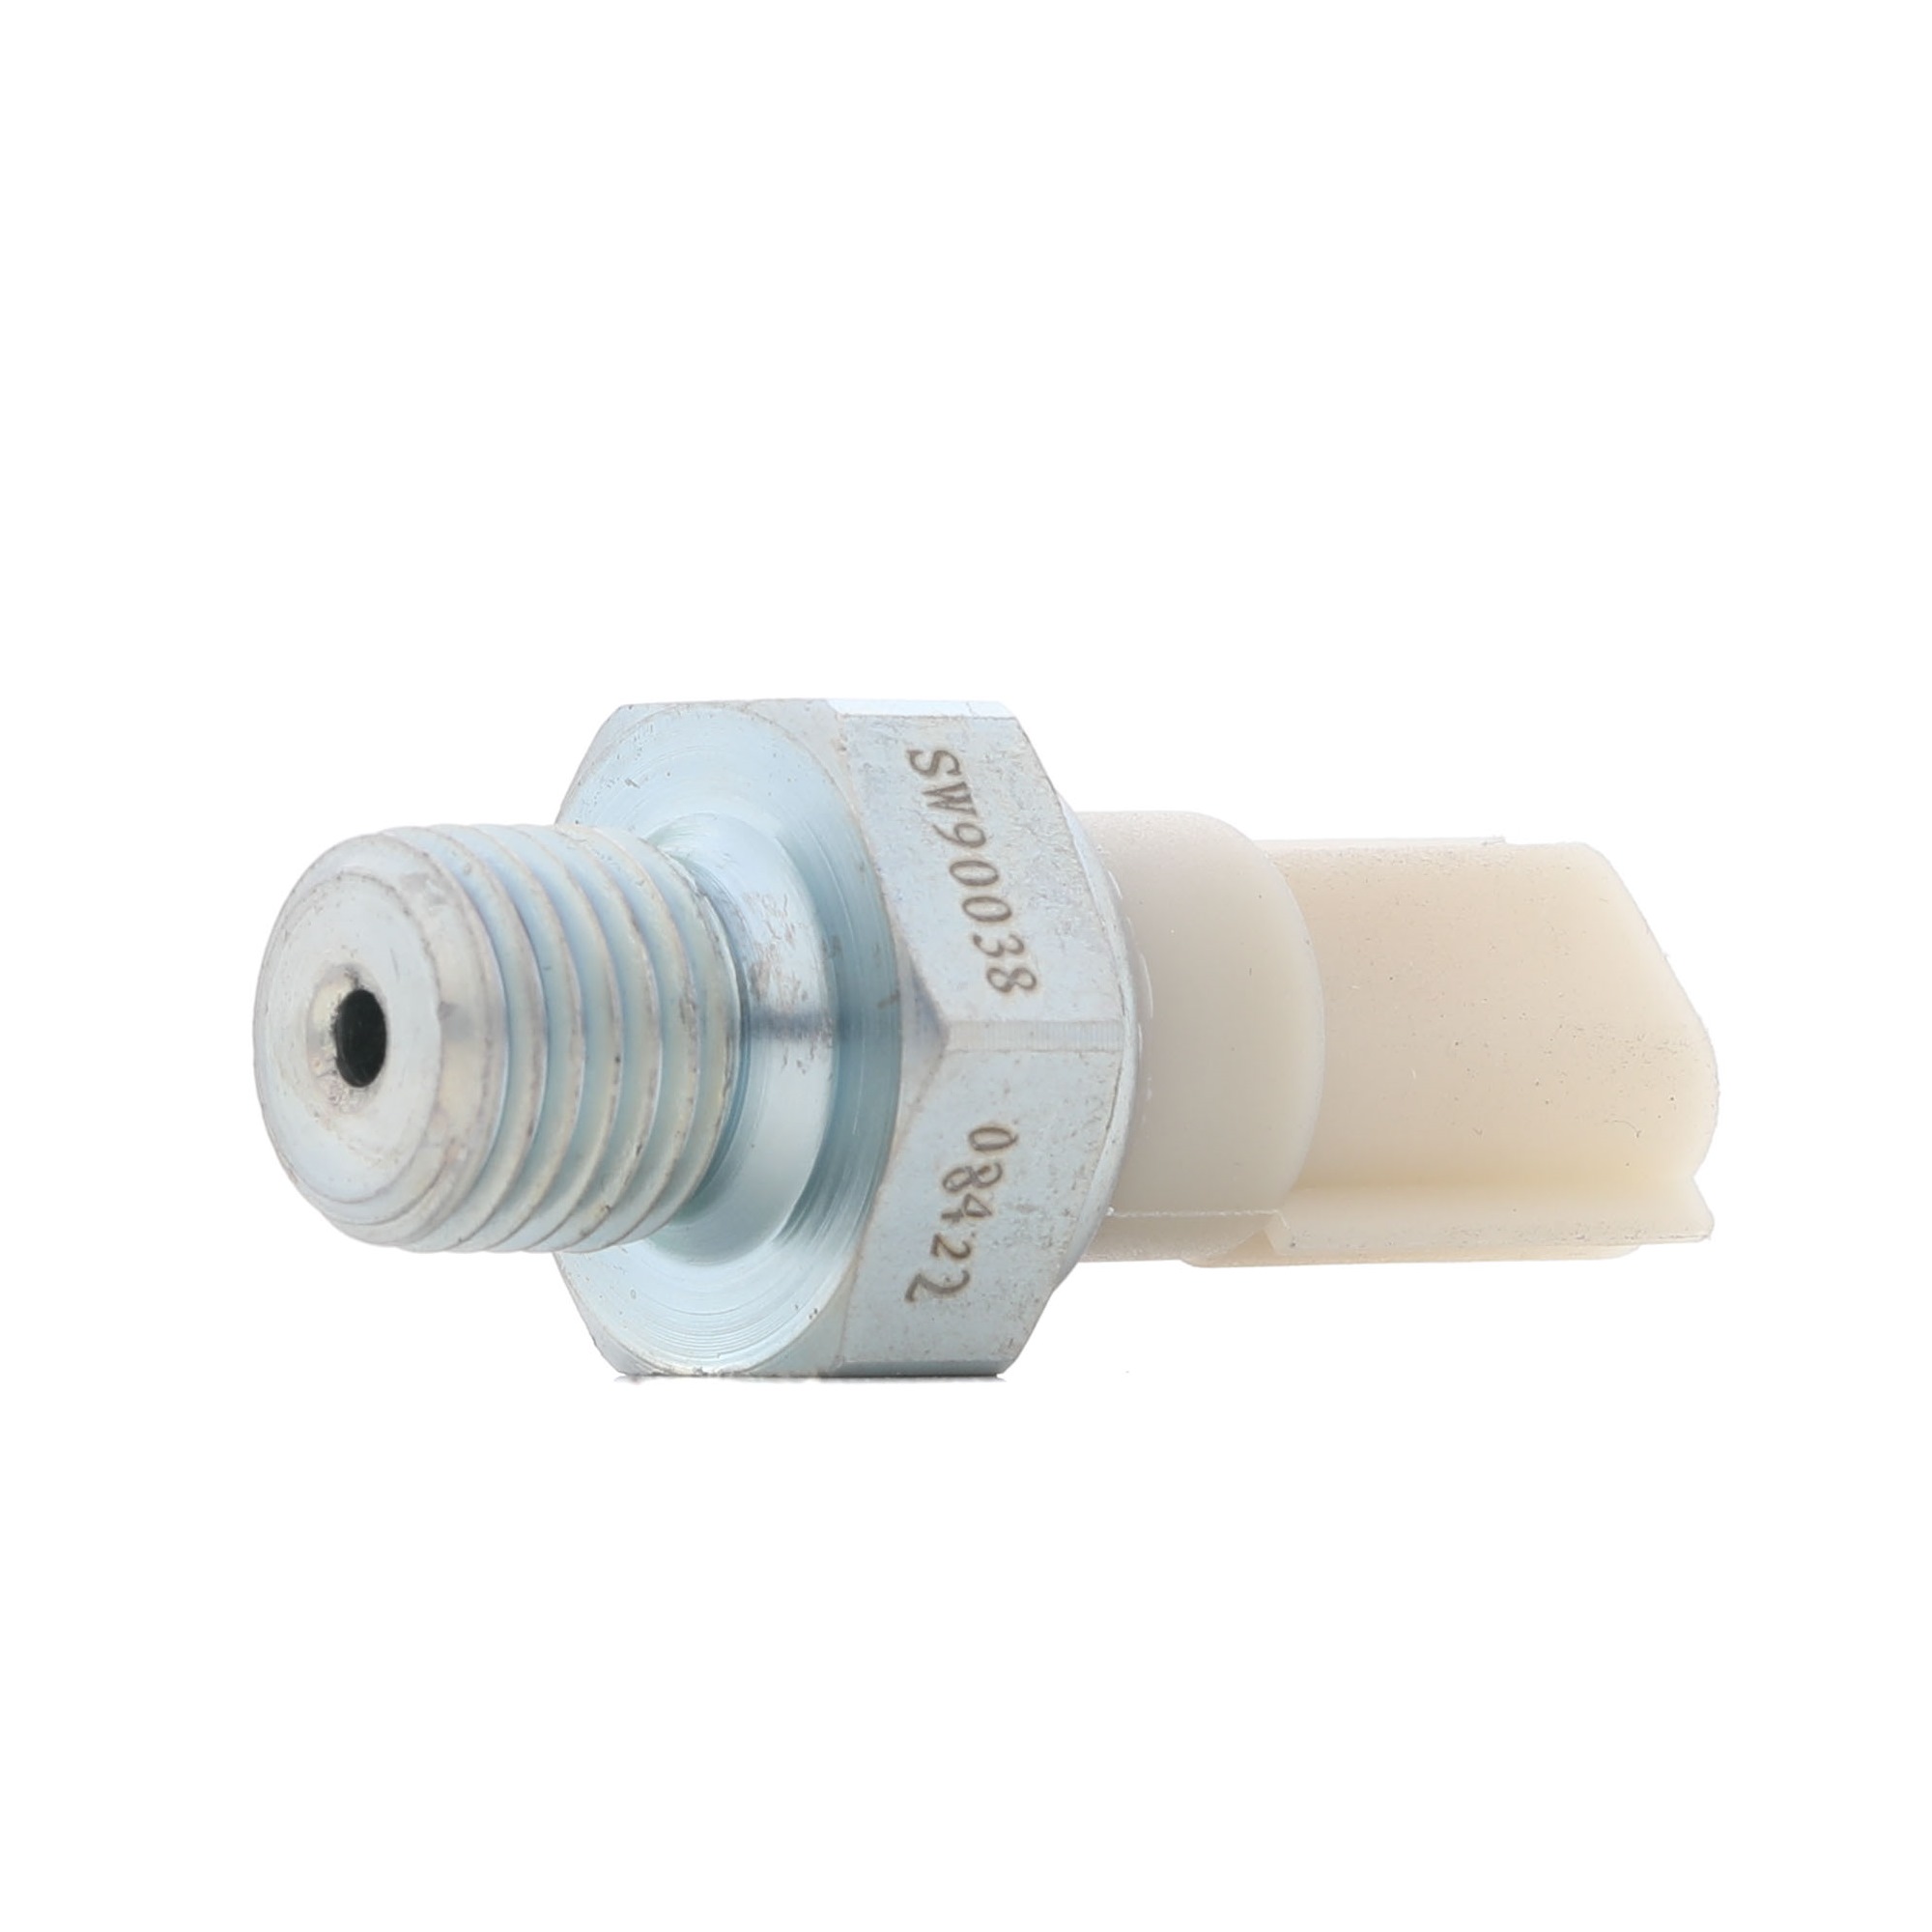 DELPHI M14 X 1.5-6g, M14X1.5, 0,15 bar Number of pins: 1-pin connector Oil Pressure Switch SW90038 buy